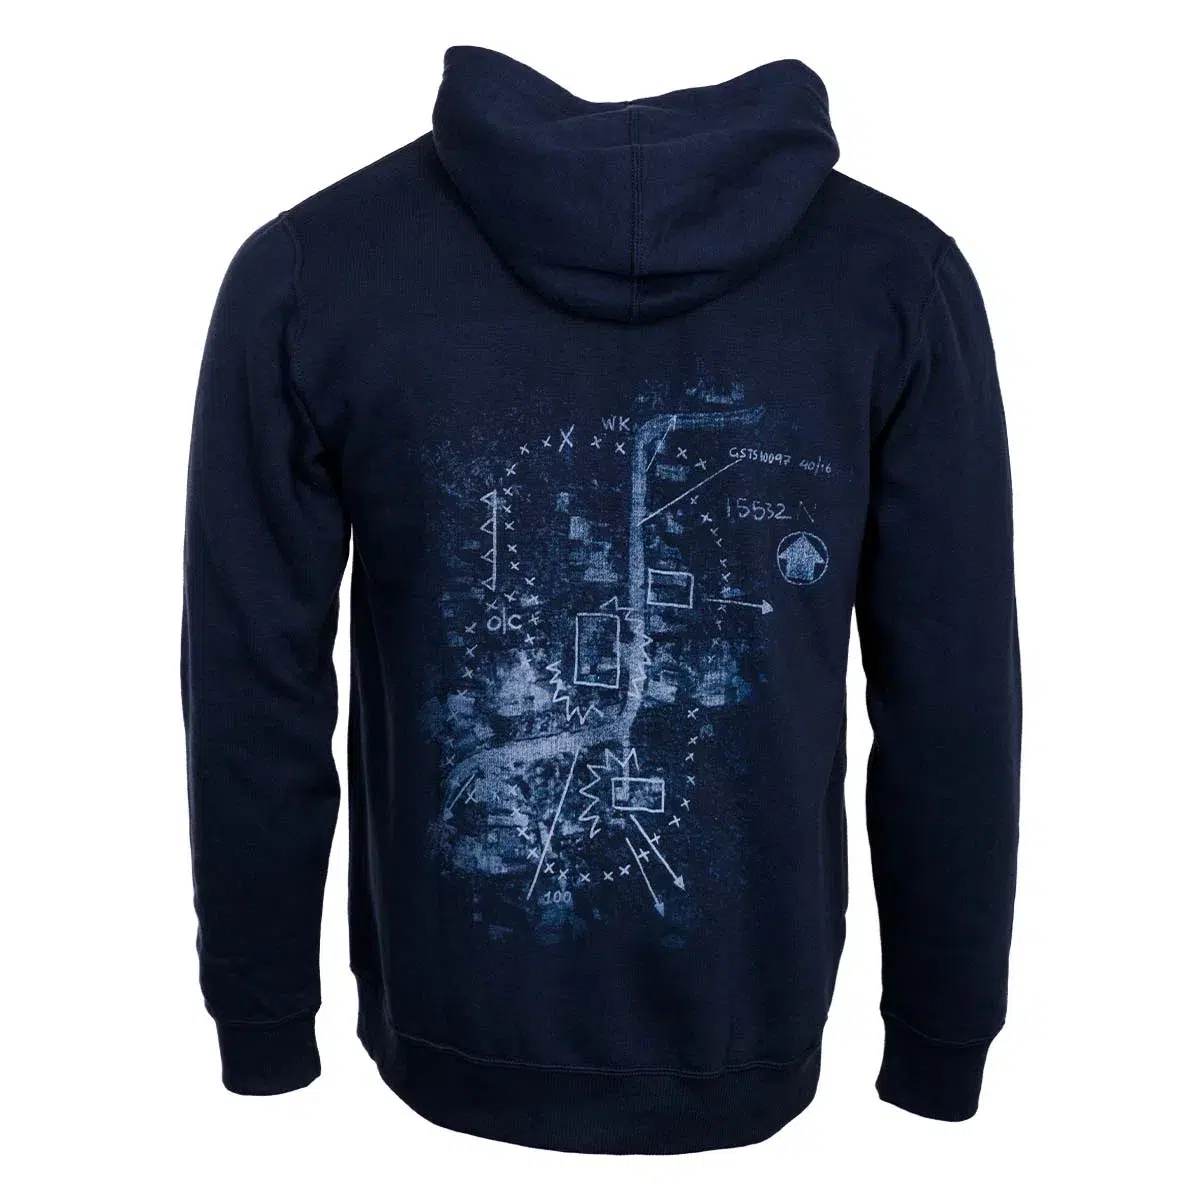 Call of Duty: Zipper Hoodie "Operation" Navy L Image 2